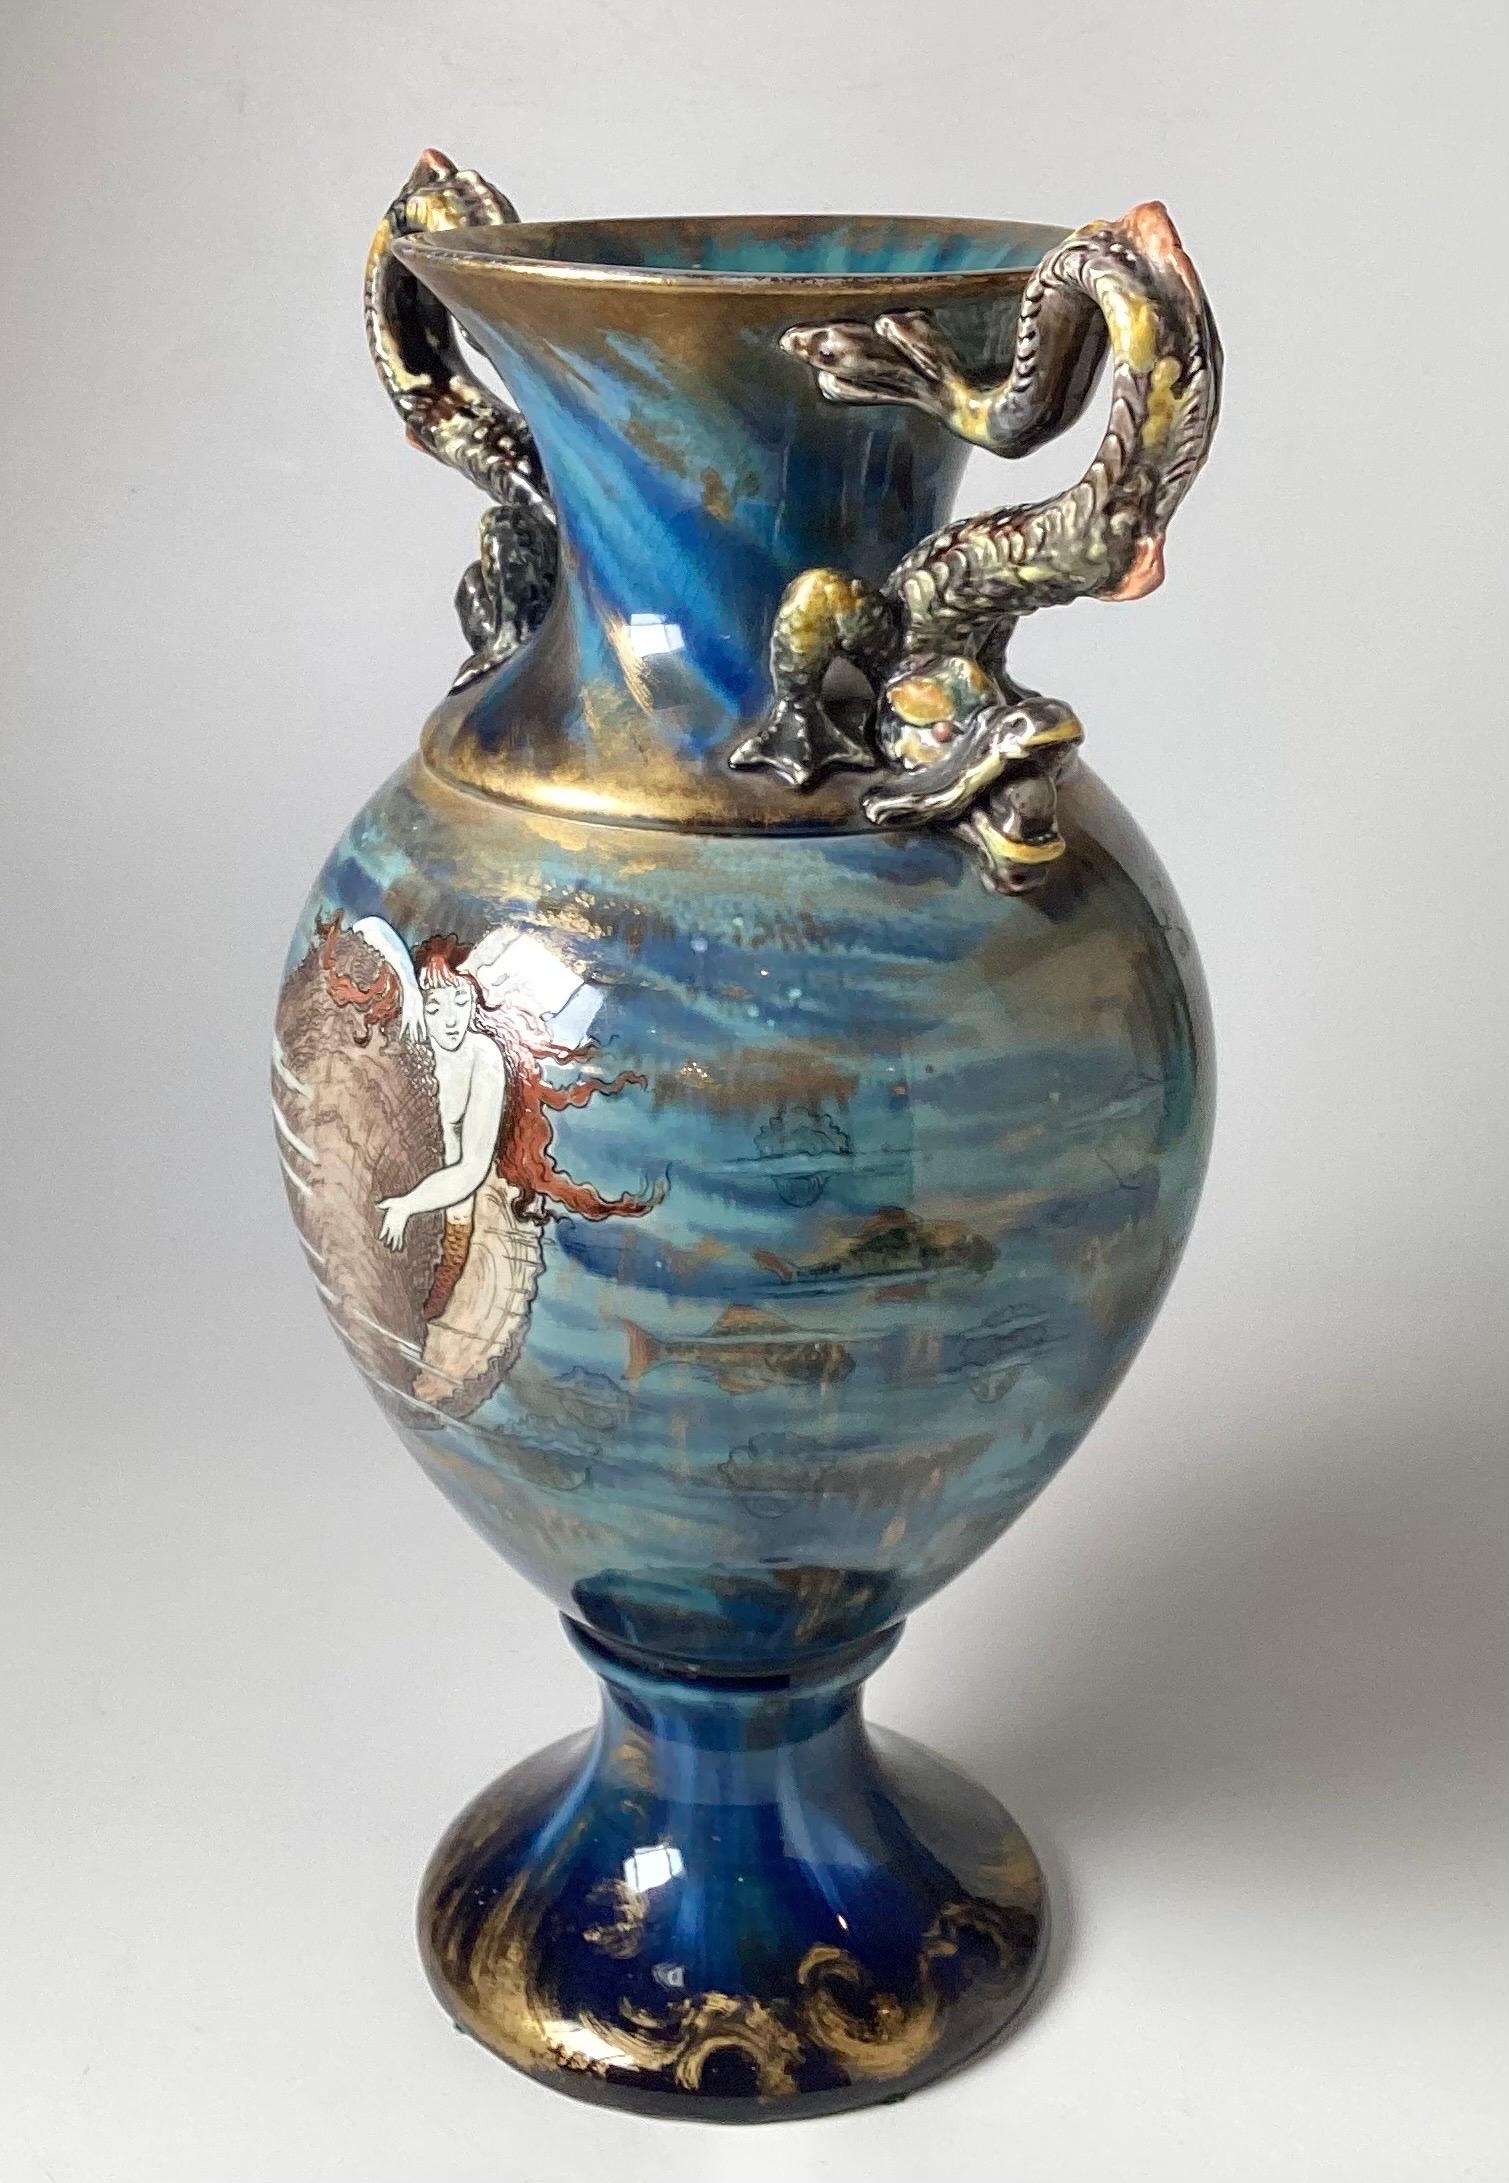 Striking hand painted aquatic themed vase with dragon handles. The design using Sqraffito technique featuring a mermaid, shell, lobster, fish in a beautiful high glaze in shades of blue, Art Nouveau style with a Japanese influence. European, 1898,